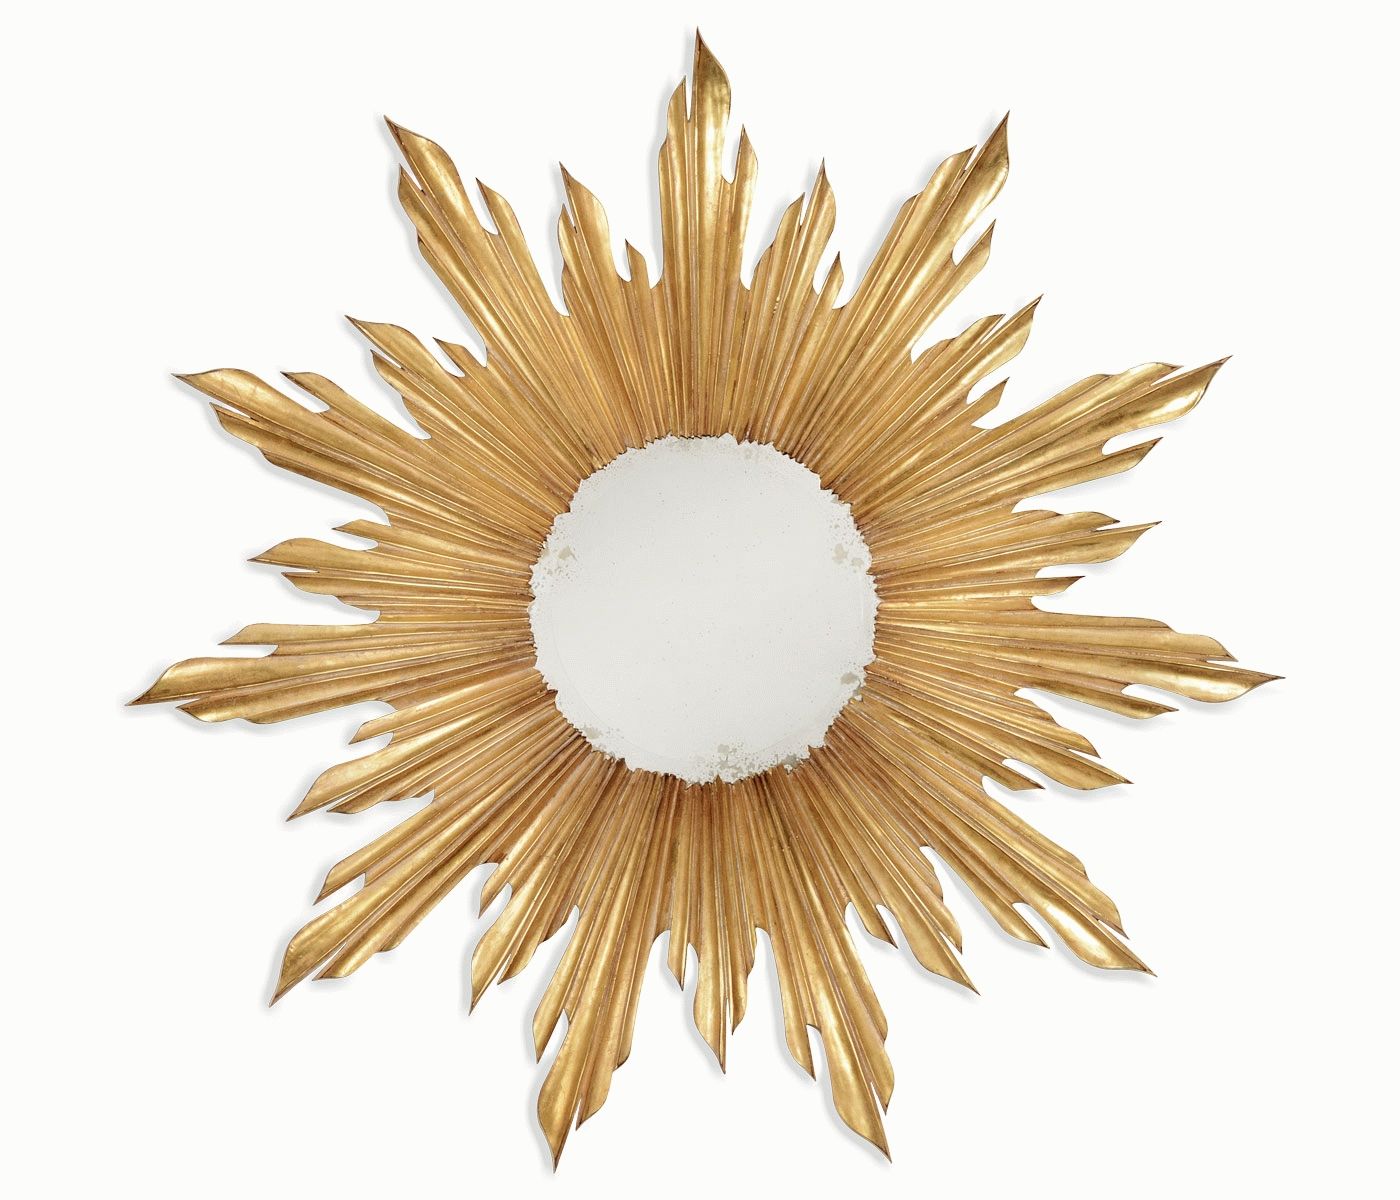 Sunburst Mirror, Sunburst Mirrors, Gold Sunburst Mirror, Gold Throughout Small Gold Mirrors (View 25 of 25)